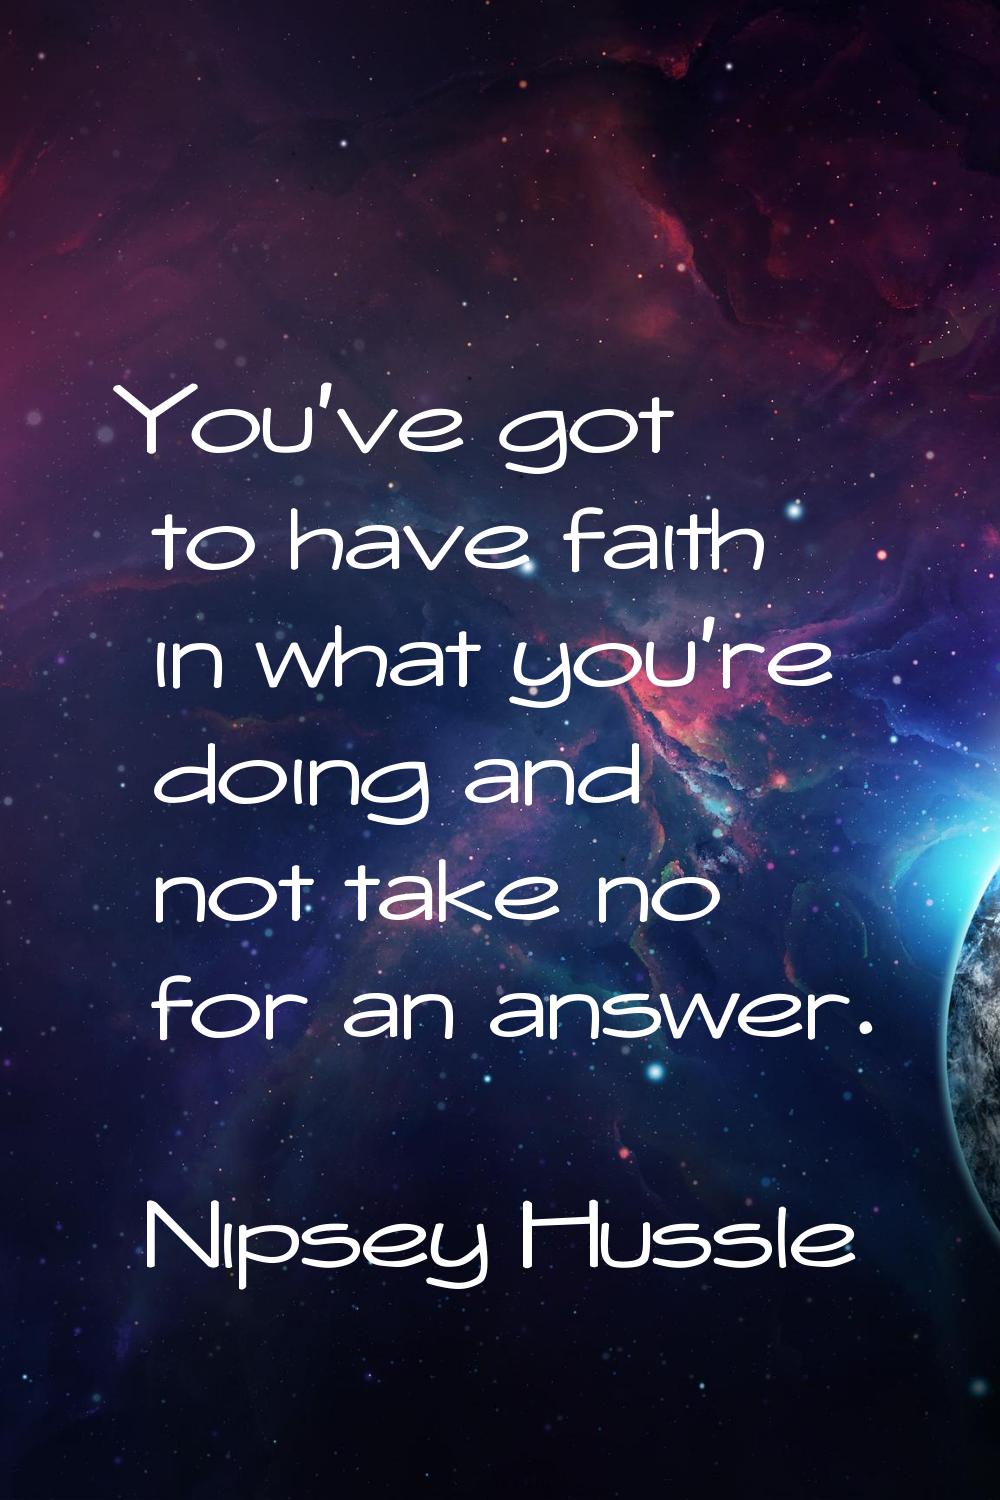 You've got to have faith in what you're doing and not take no for an answer.